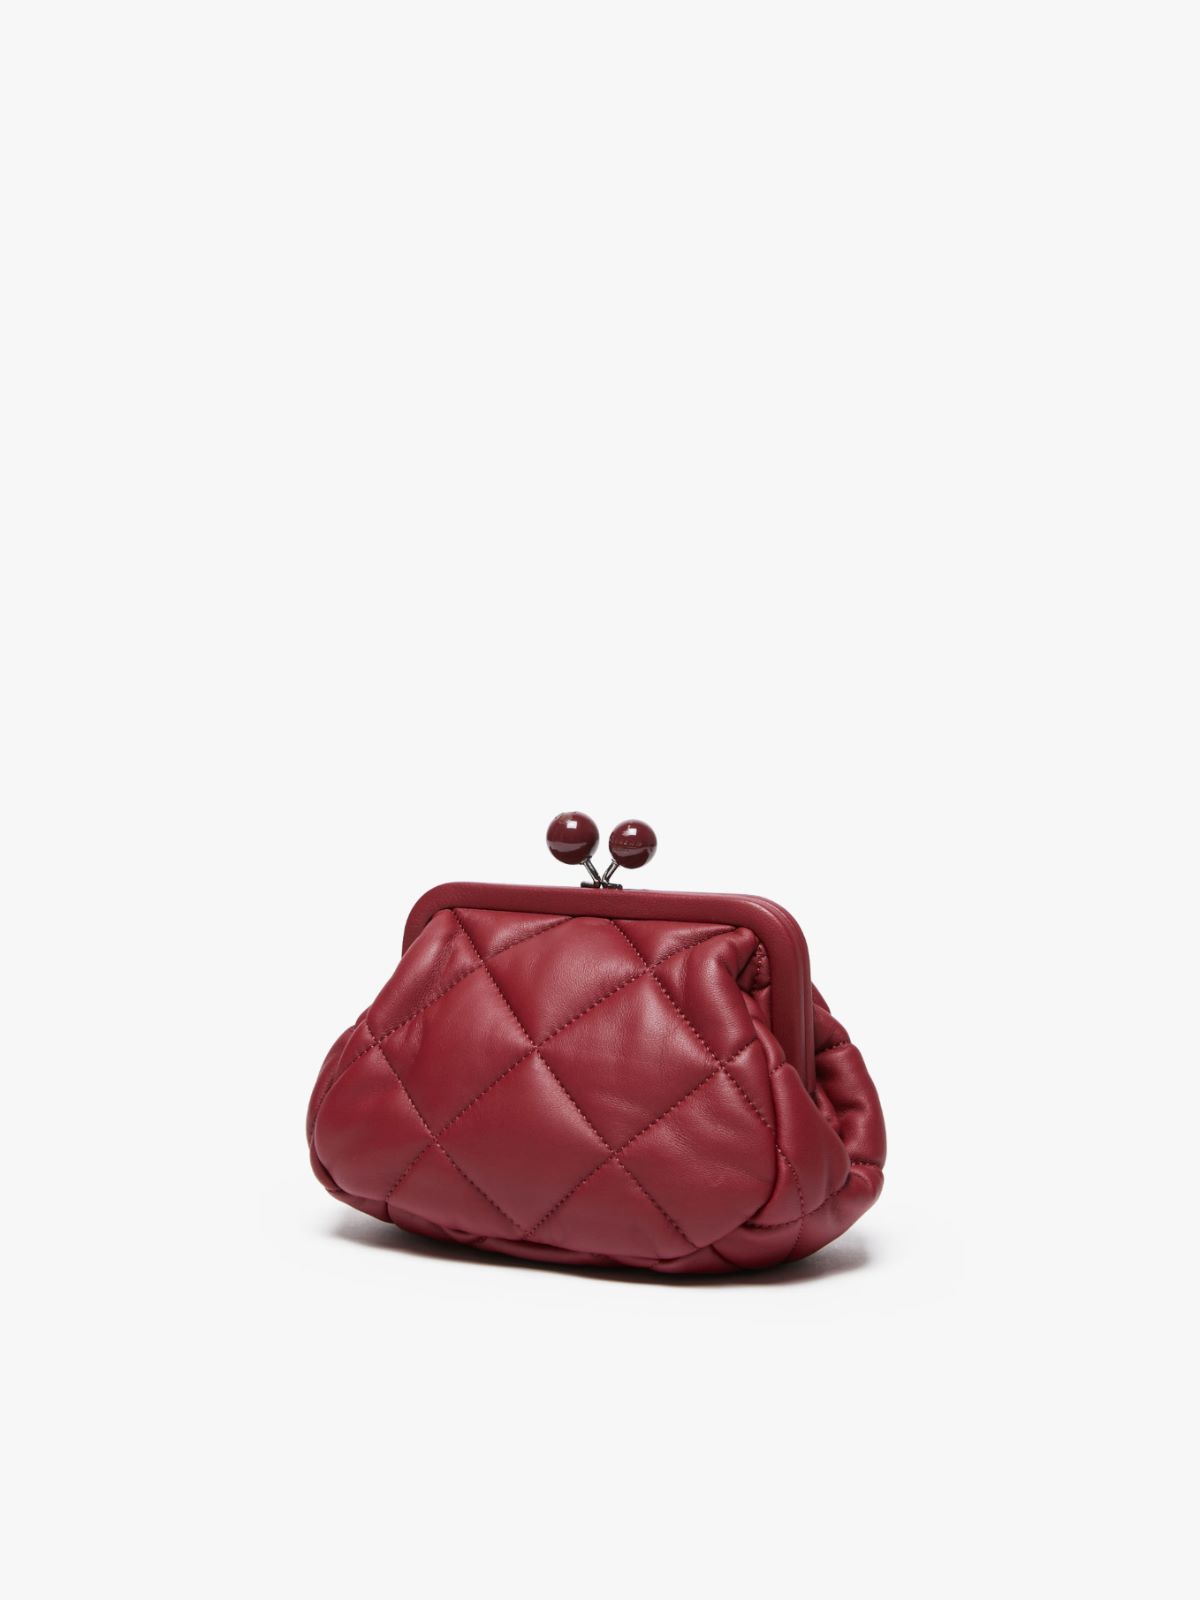 Small Pasticcino Bag in nappa leather - BORDEAUX - Weekend Max Mara - 2